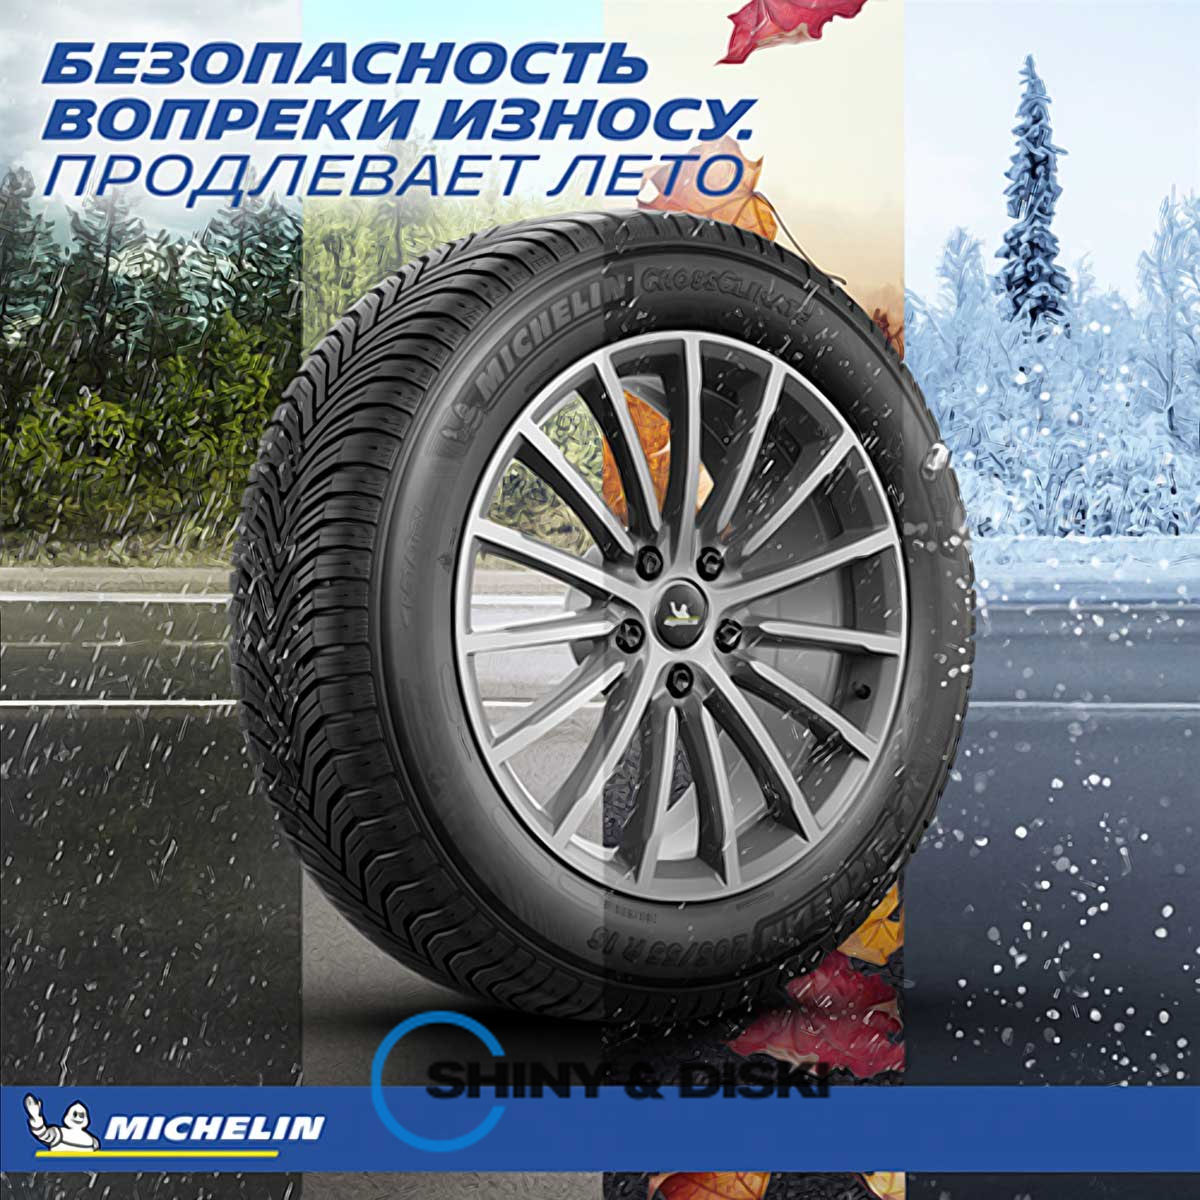 покрышки michelin cross climate+ 195/60 r16 93v xl